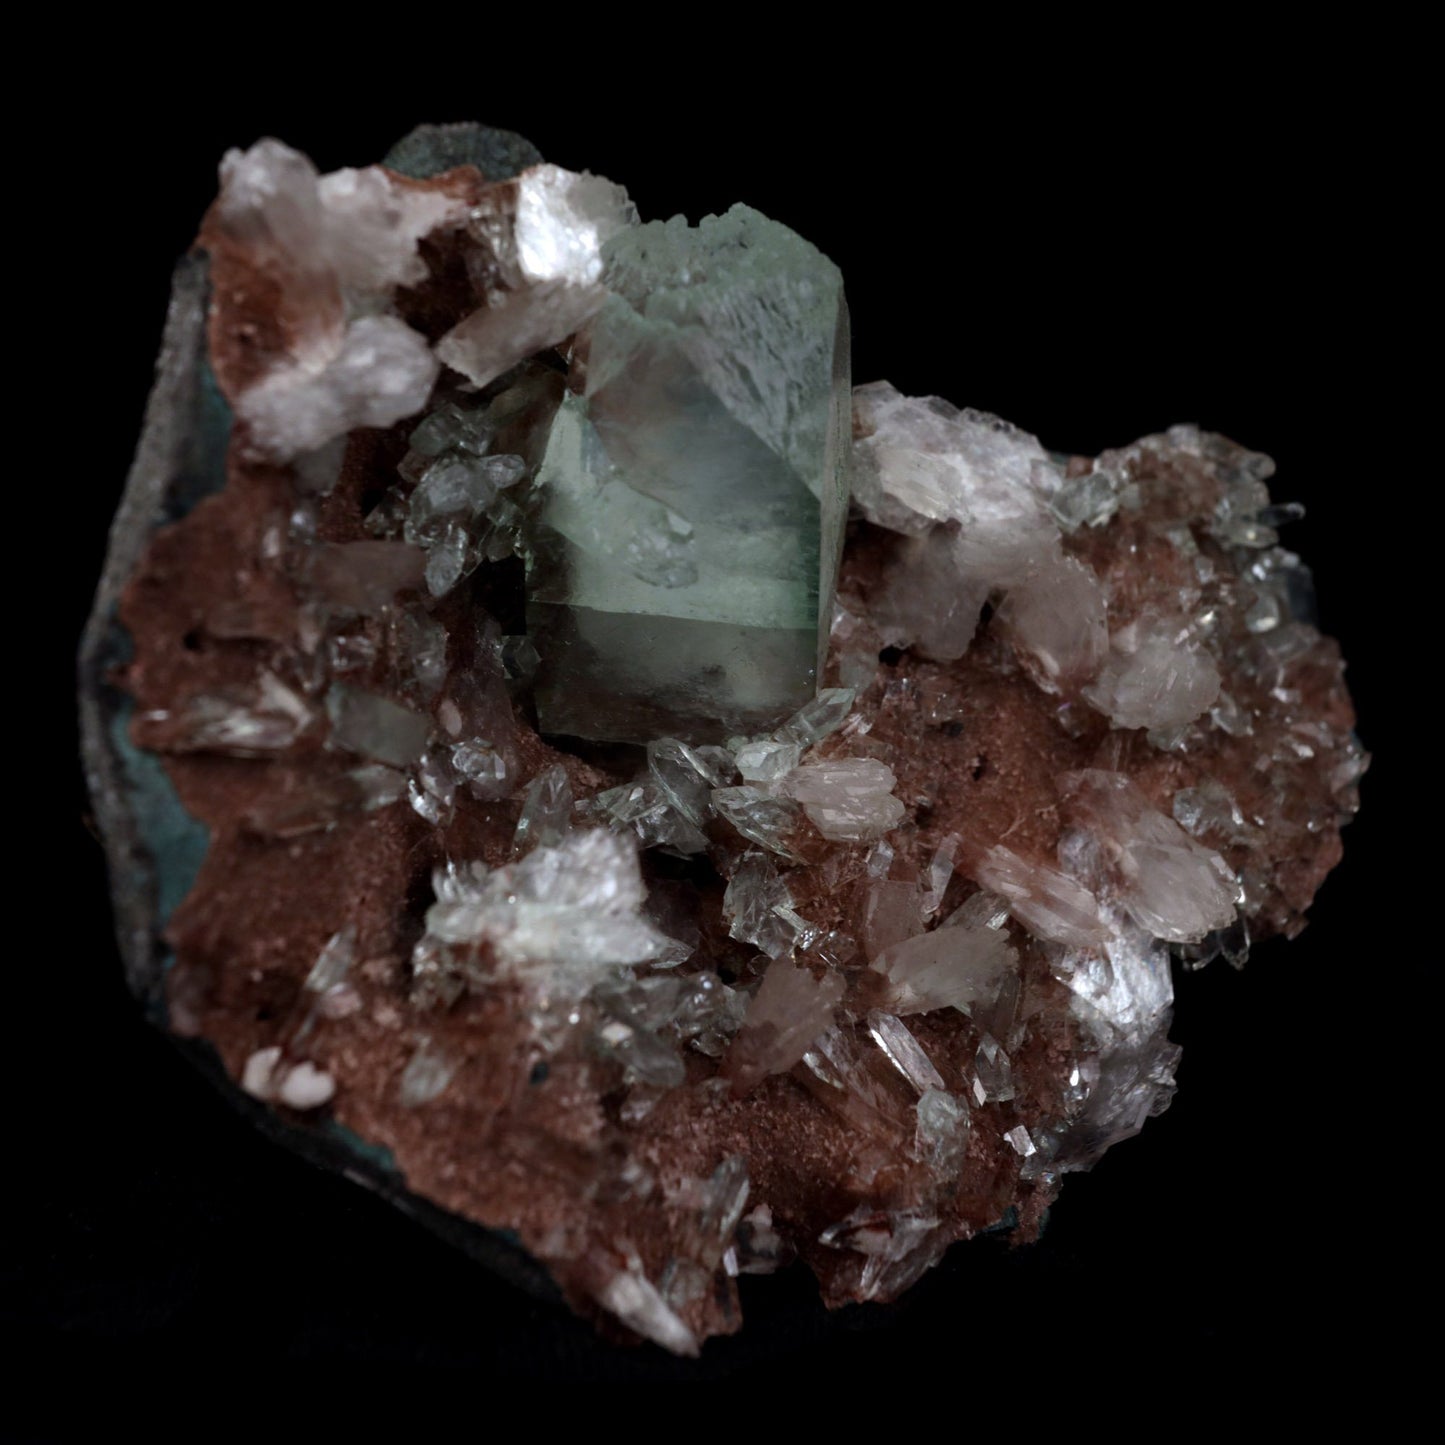 Fluorapophyllite with Stilbite on Chalcedony Natural Mineral Specimen …  https://www.superbminerals.us/products/fluorapophyllite-with-stilbite-on-chalcedony-natural-mineral-specimen-b-4789  Features: On this excellent enormous combination from this important Jalgaon location, a beautiful, huge, blocky bi-hued tetragonal apophyllite is dramatically framed by light peach coloured stilbites.The eye-catching glassy, translucent cube features a rich mint-green body, a scalloped sparkling white termination